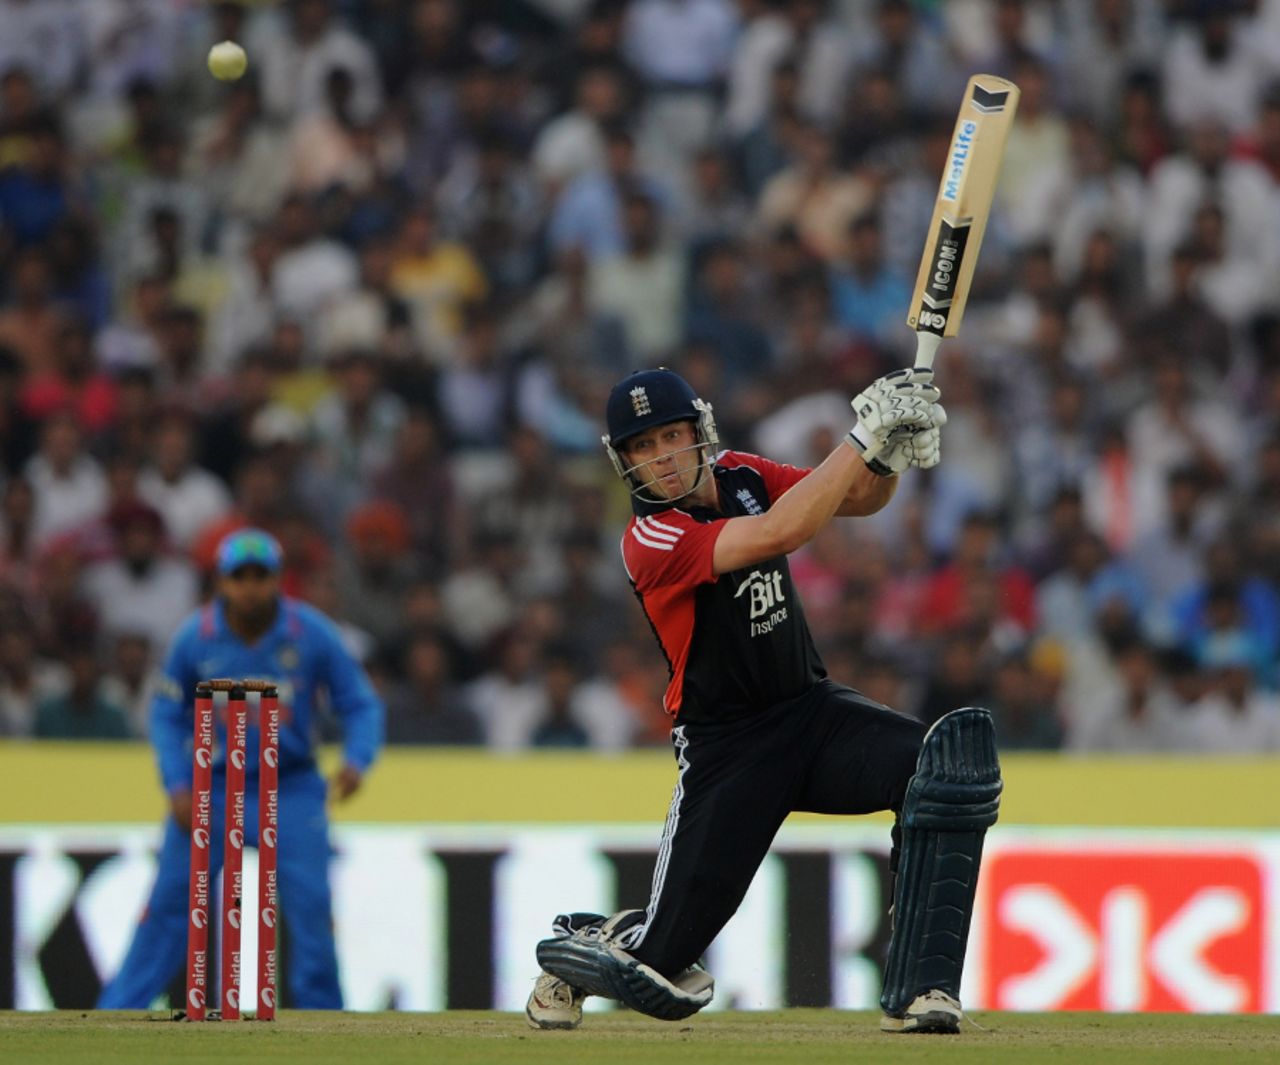 Jonathan Trott scoops one over cover during his unbeaten 98, India v England, 3rd ODI, Mohali, October 20, 2011